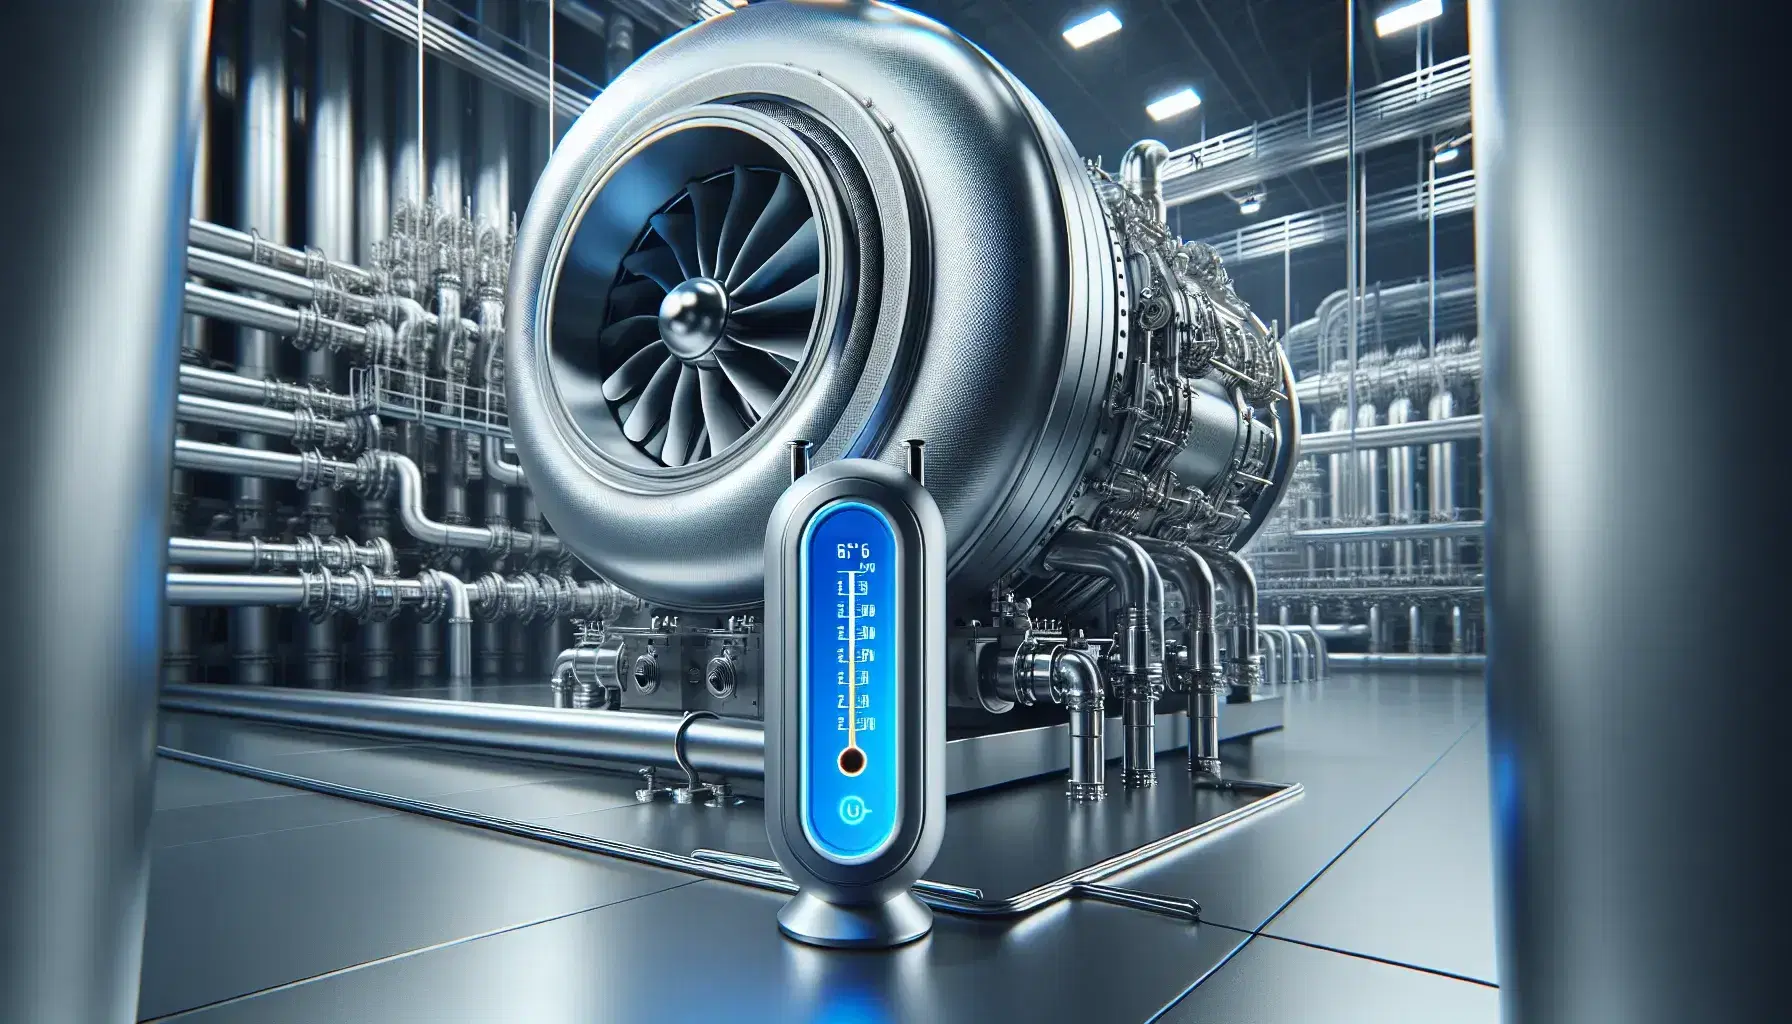 Modern, silvery steam turbine with visible blades, blue digital thermometer on black pipe and blurred heat exchanger in the background.